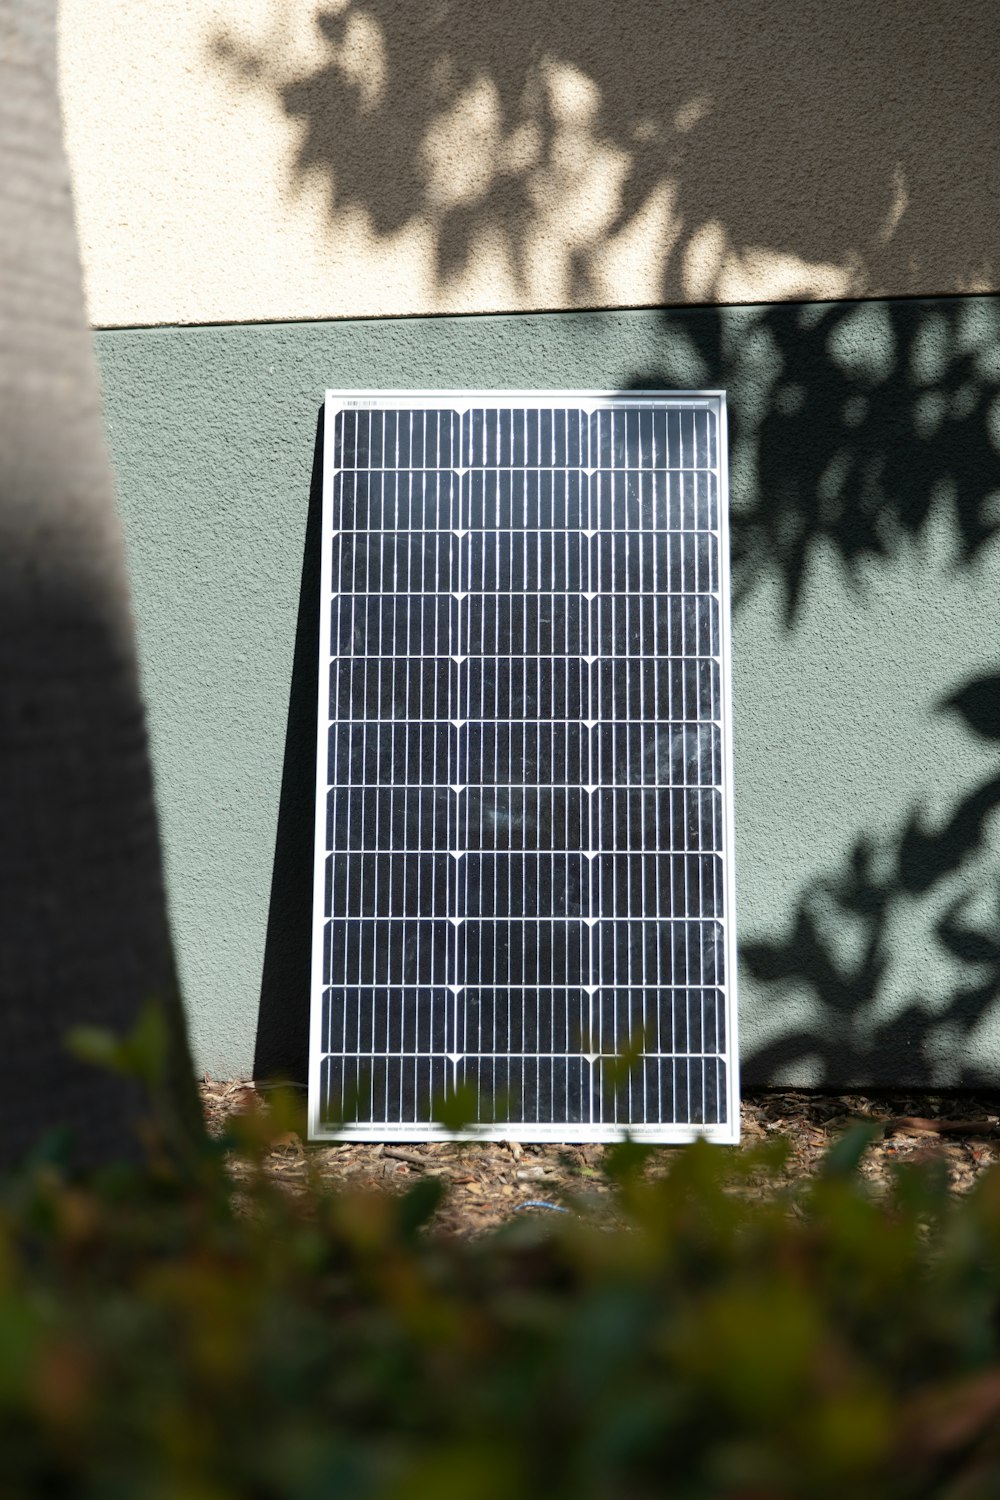 a solar panel sitting on the ground next to a building